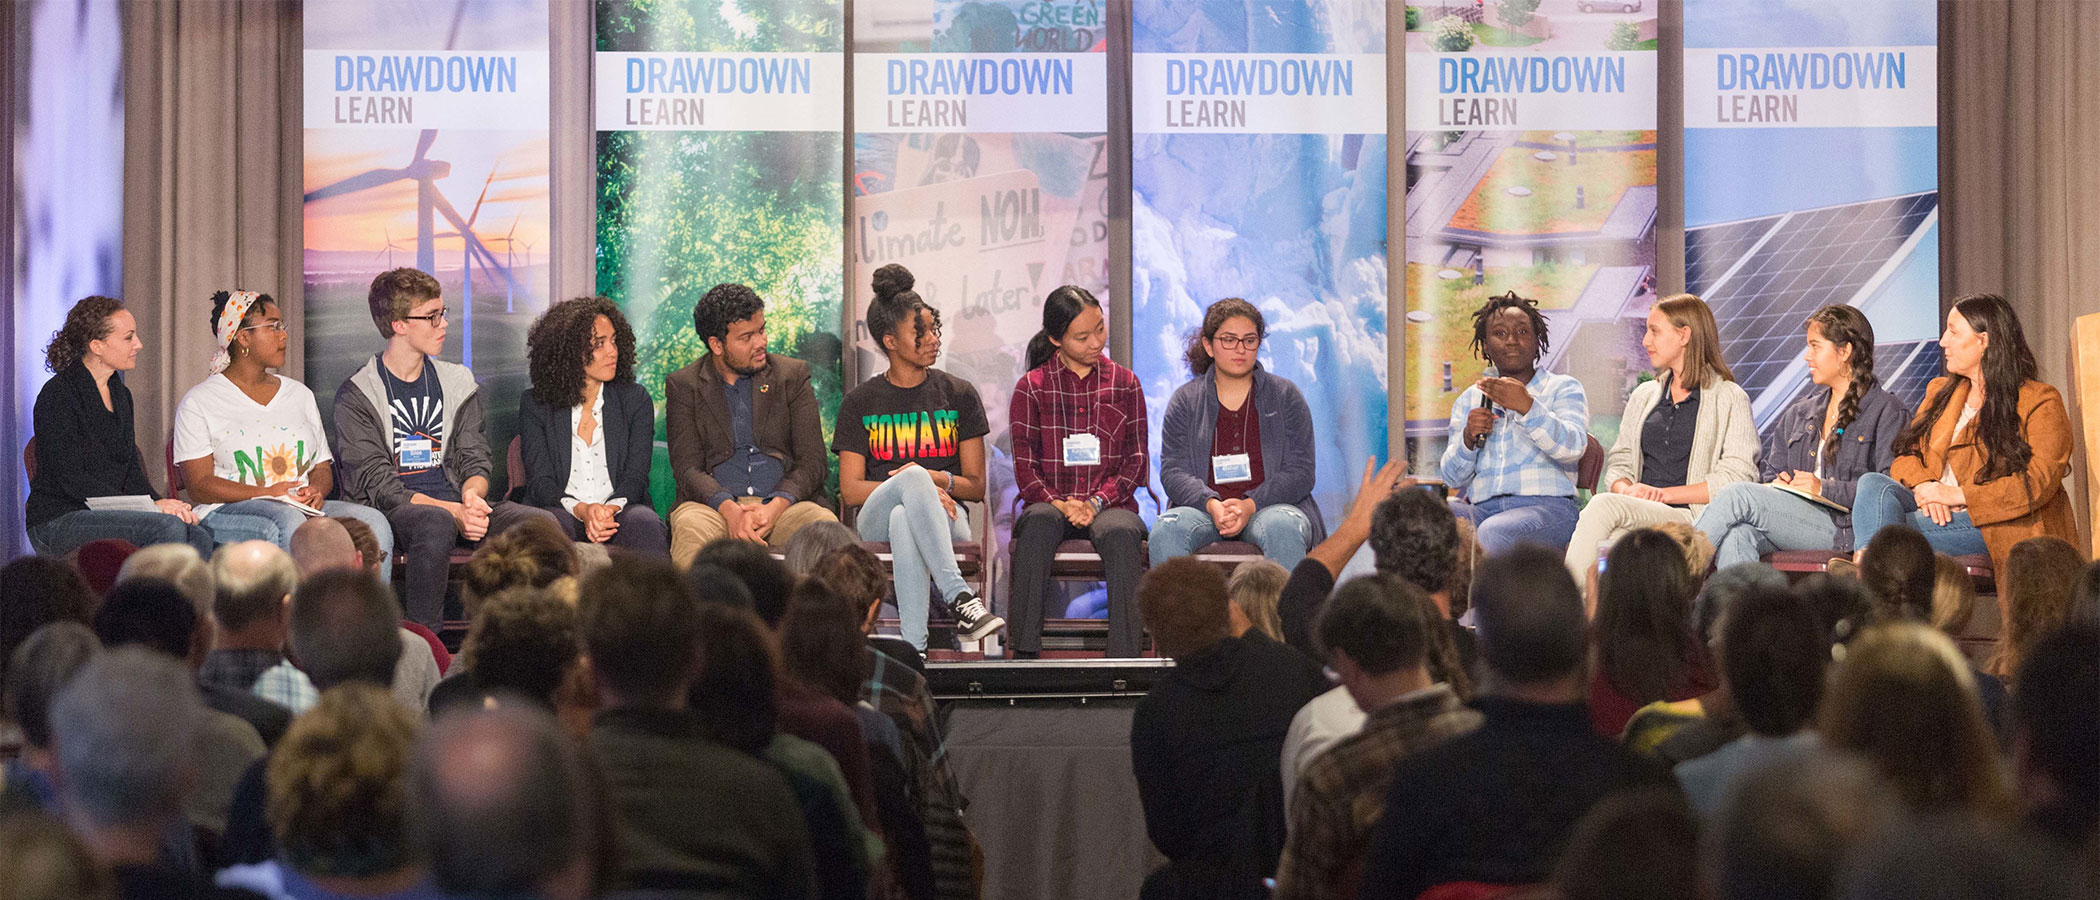 A panel of students on stage discussing climate solutions at the Drawdown Learn conference